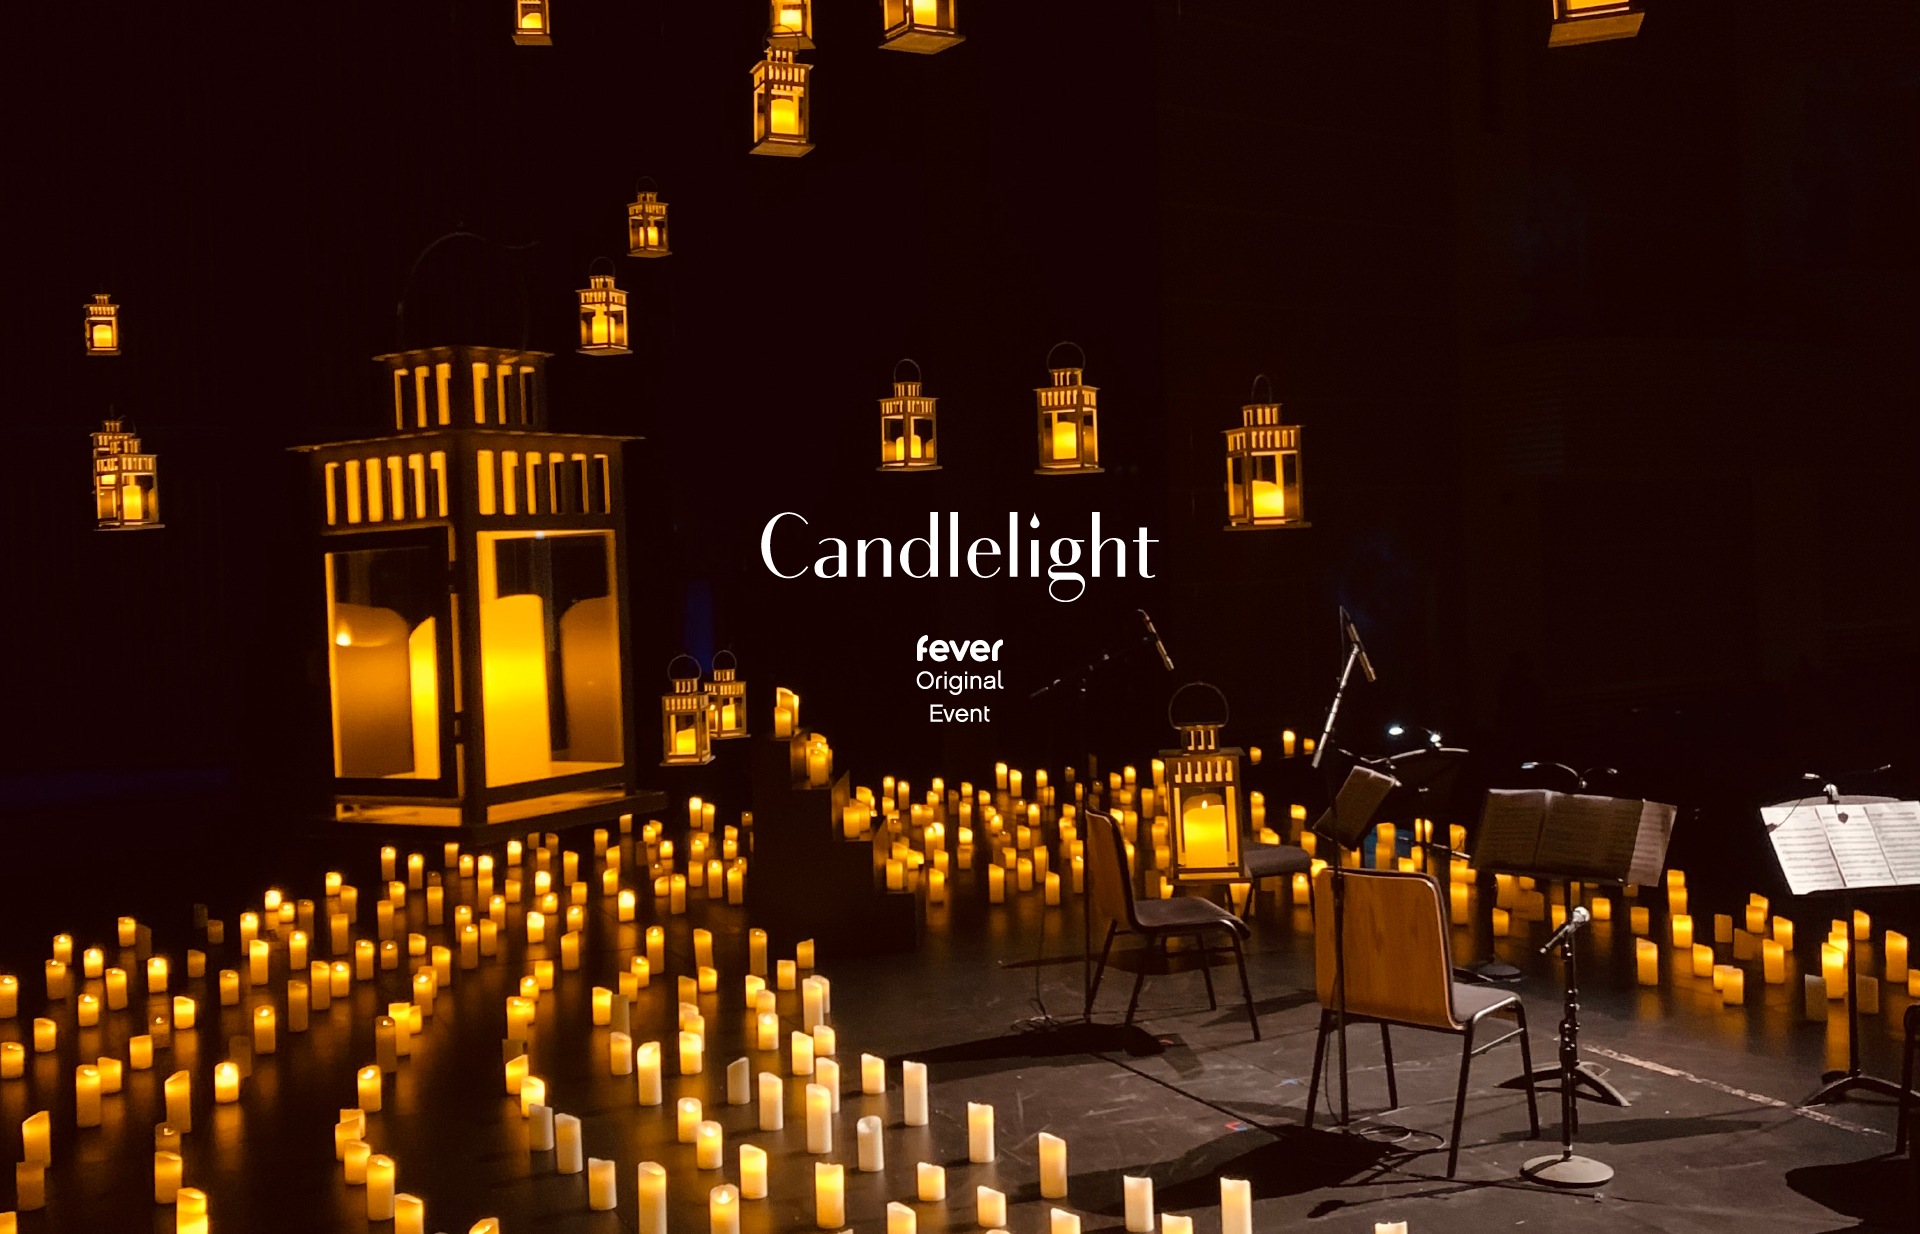 Candelight concert at Sands Theatre, Singapore